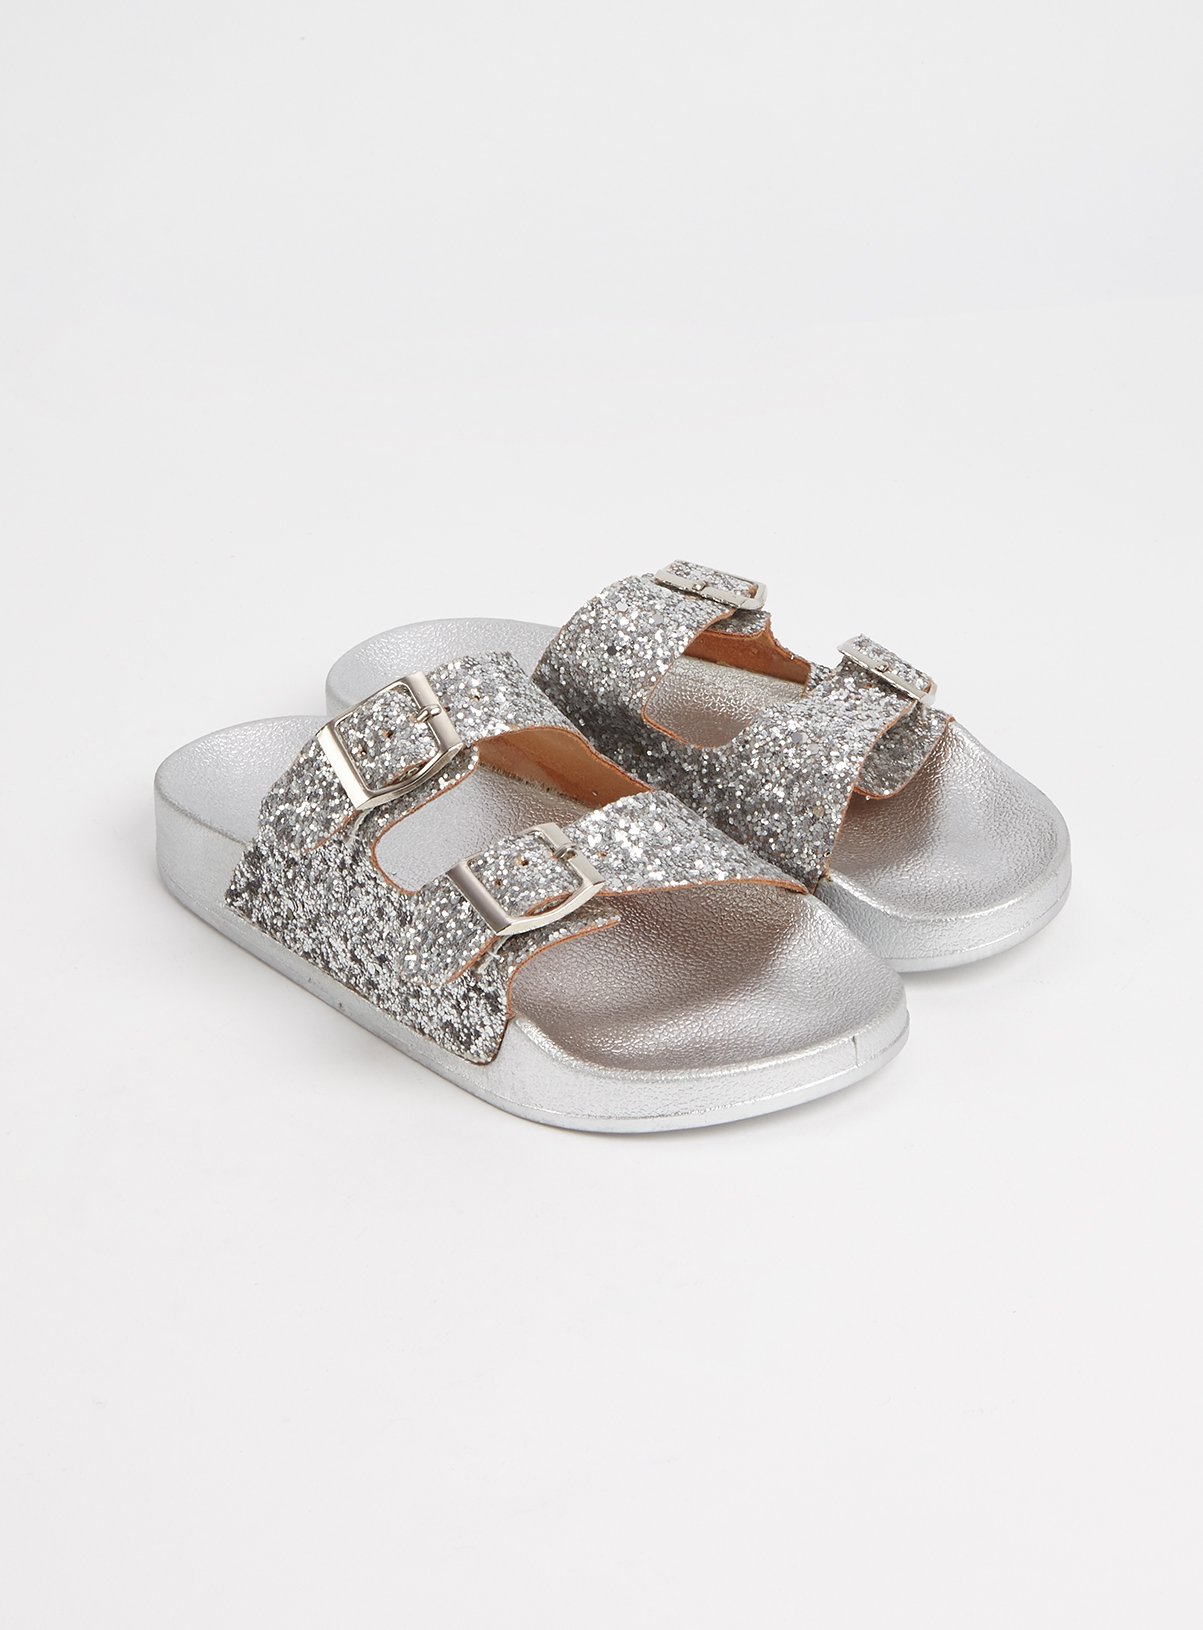 Silver Glitter Buckle Sliders Review